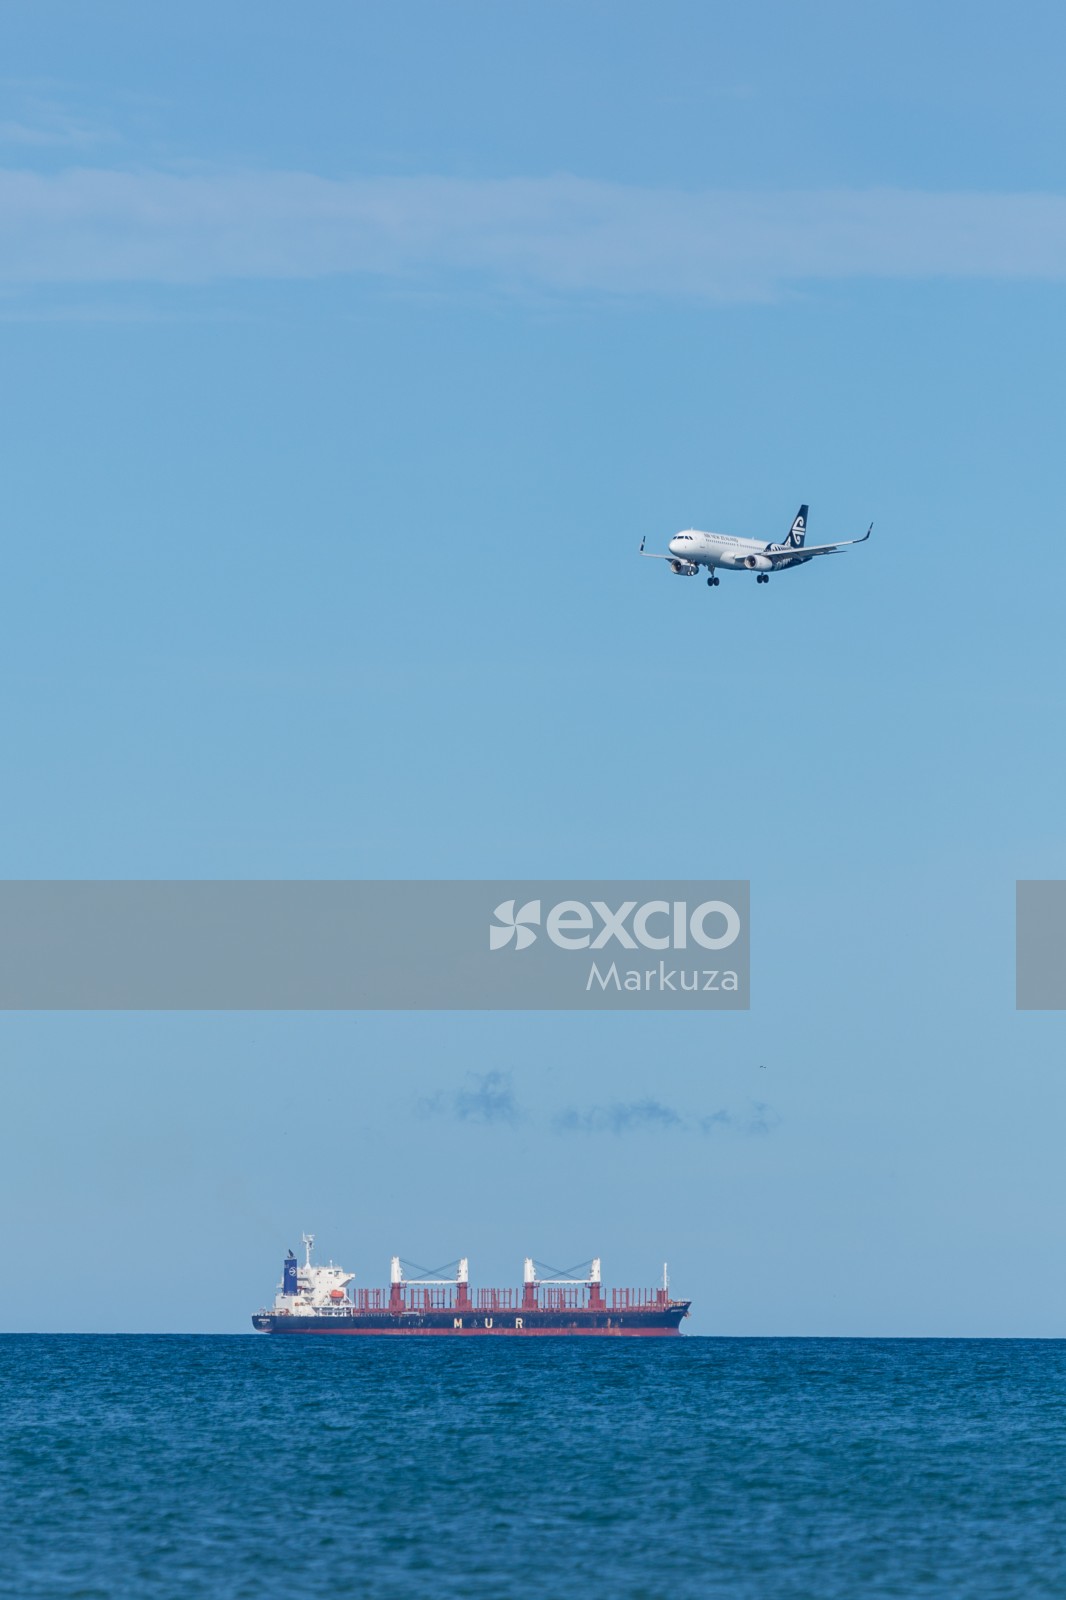 MUR cargo ship and AIR NZ plane over water